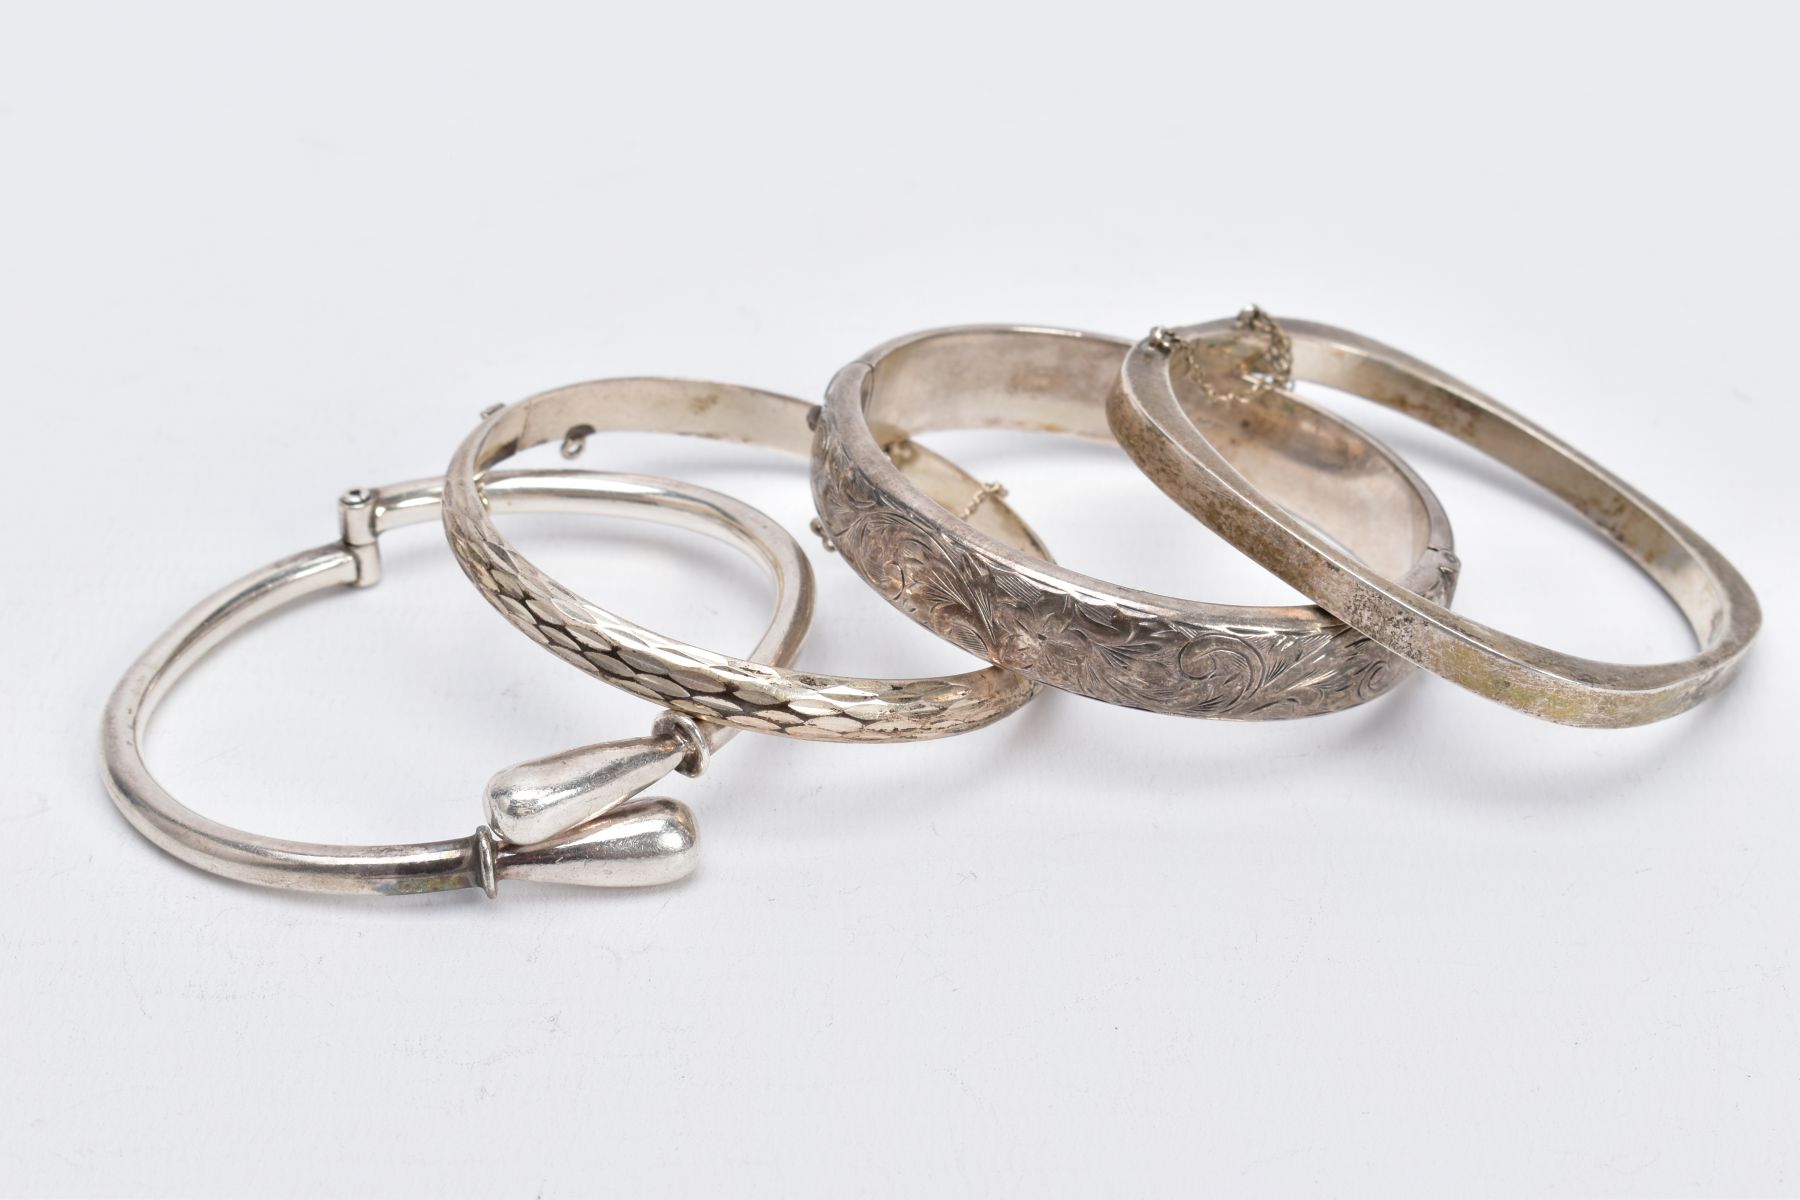 FOUR SILVER BANGLES, such as a floral engraved hinged bangle, with broken safety chain, hallmarked